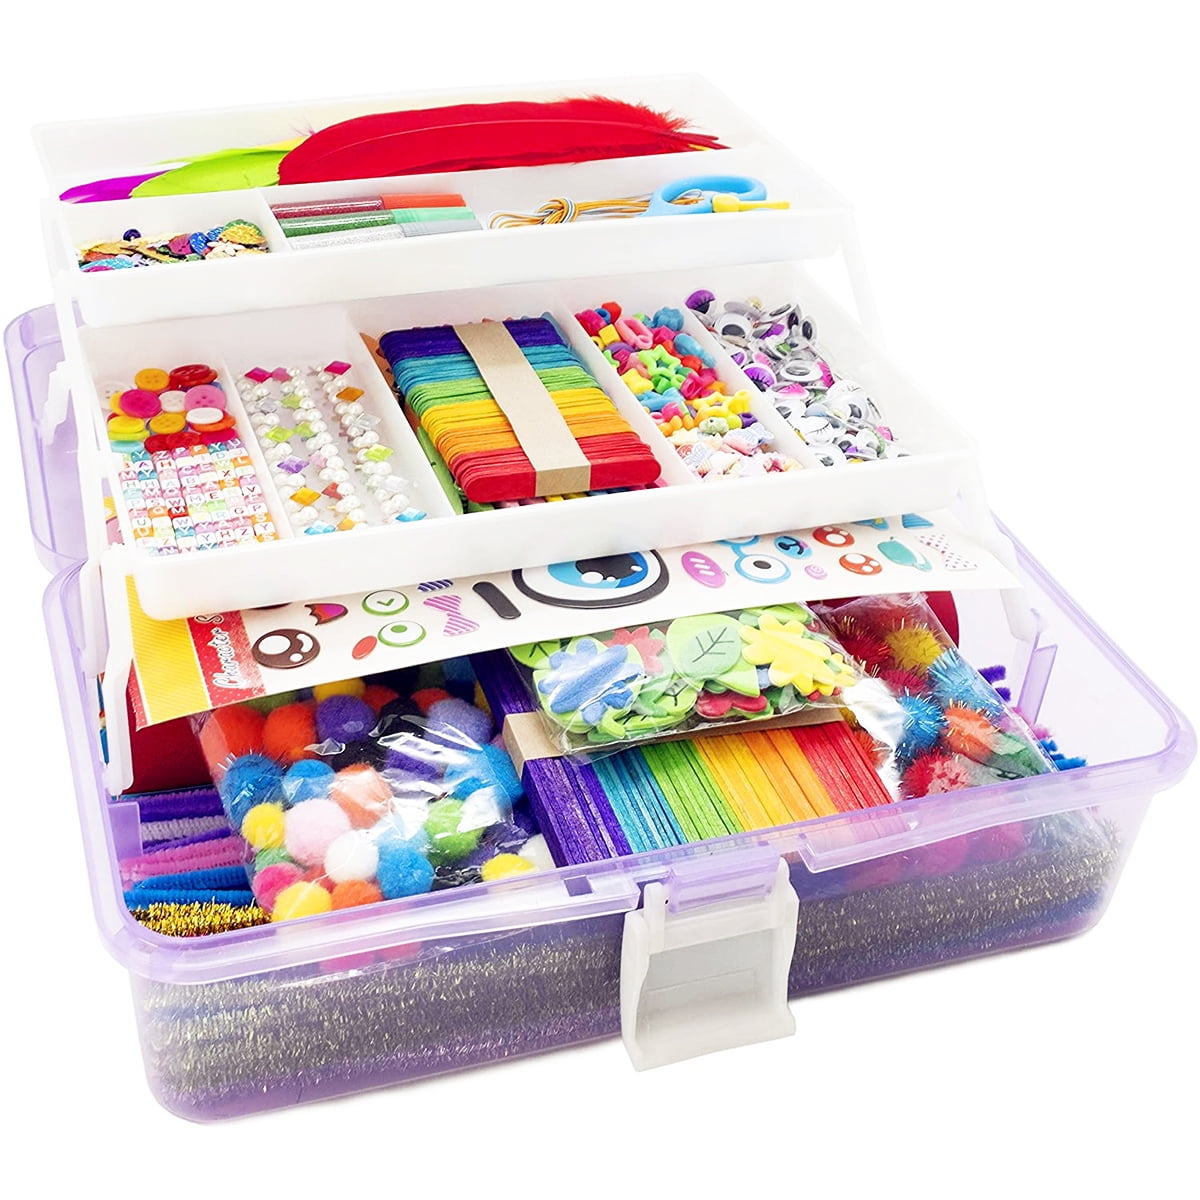 Kraftic kraftic arts and crafts supplies set for kids ages 4-8, giftable  craft organizer box with 2000+ pcs diy art supplies for todd